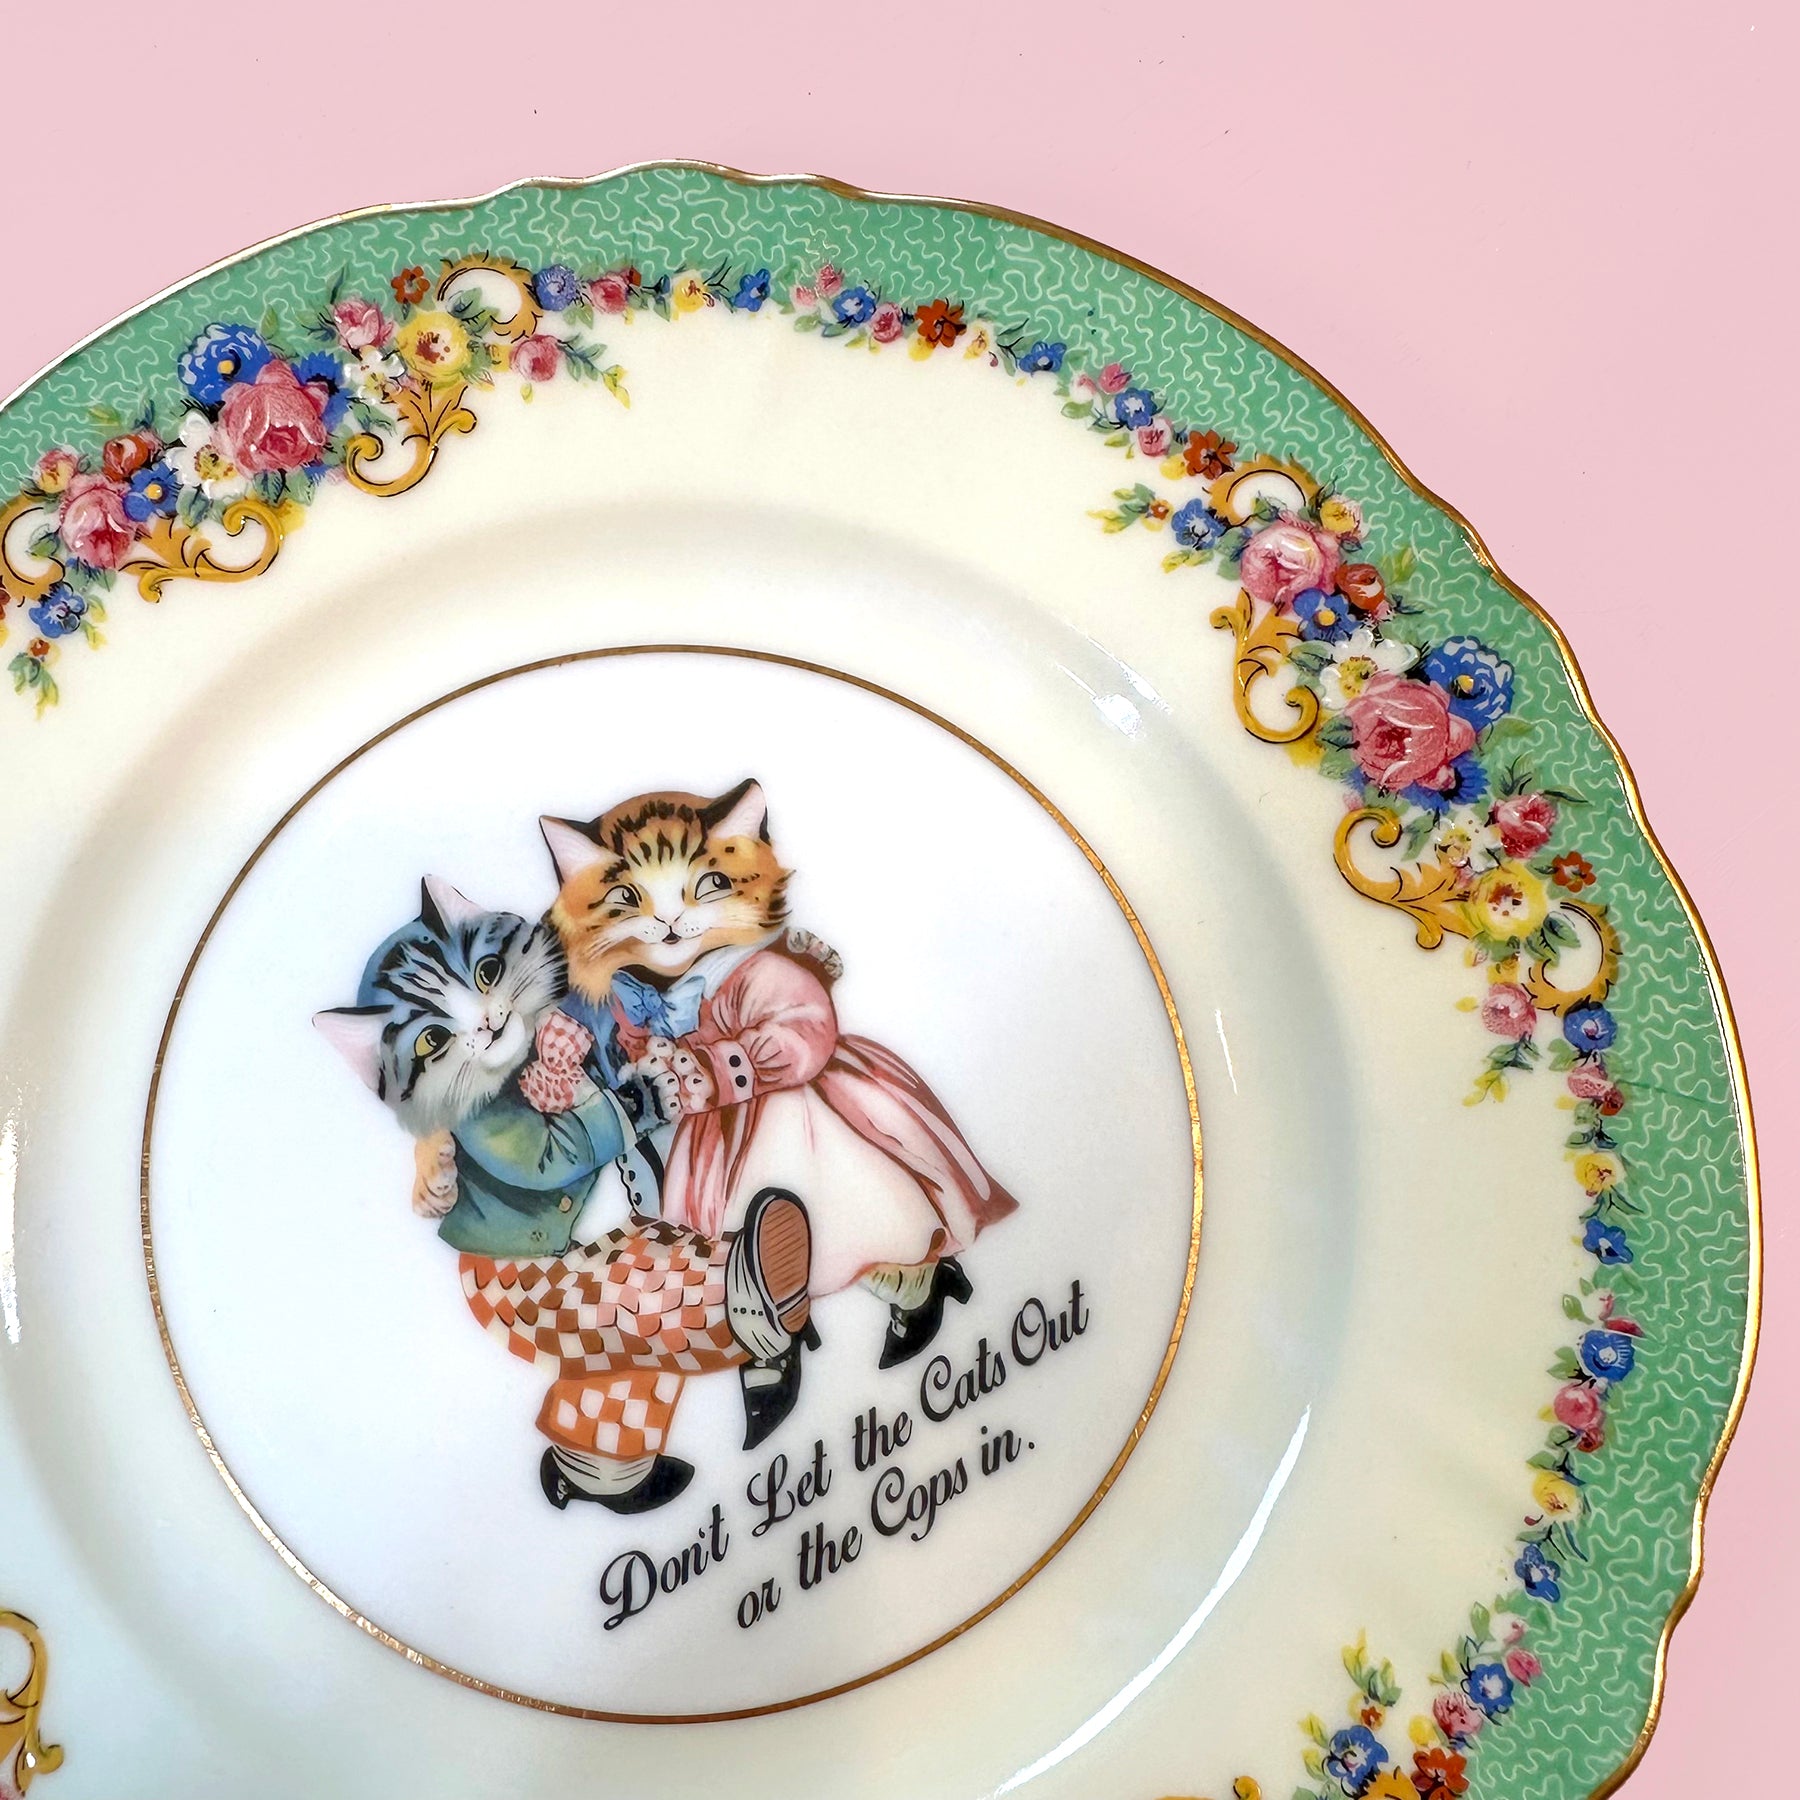 Vintage Art Plate - Large Cat plate - "Don't Let the Cats Out or the Cops in."